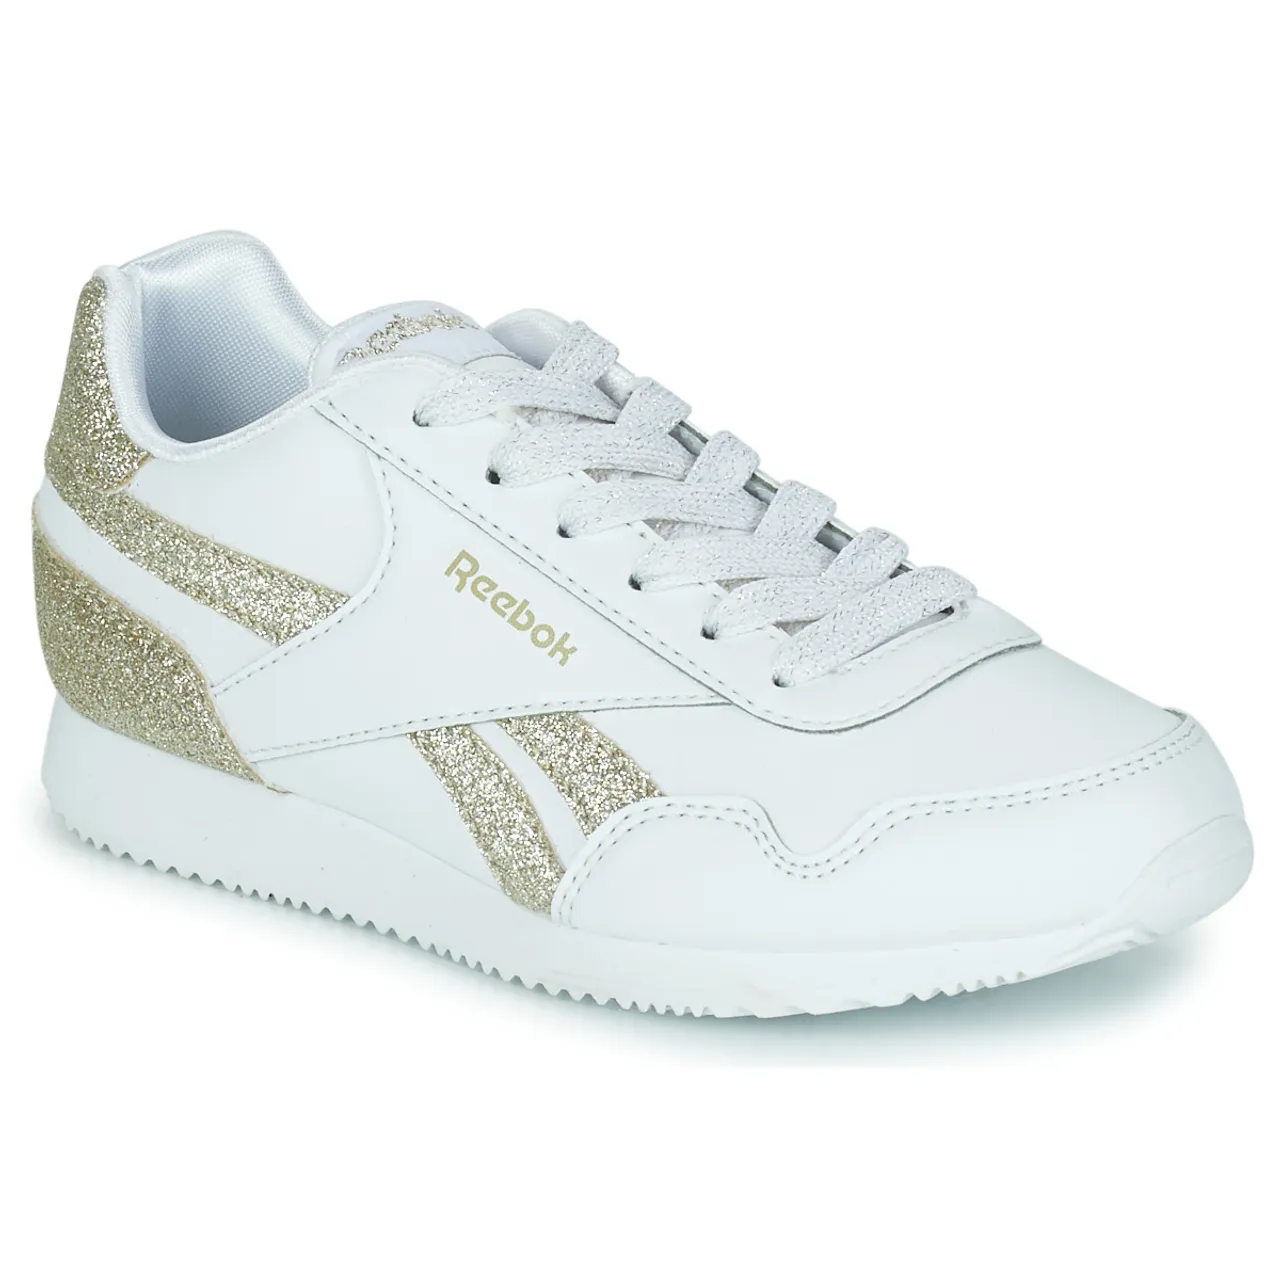 Reebok Classic  REEBOK ROYAL CL JOG  girls's Children's Shoes (Trainers) in White